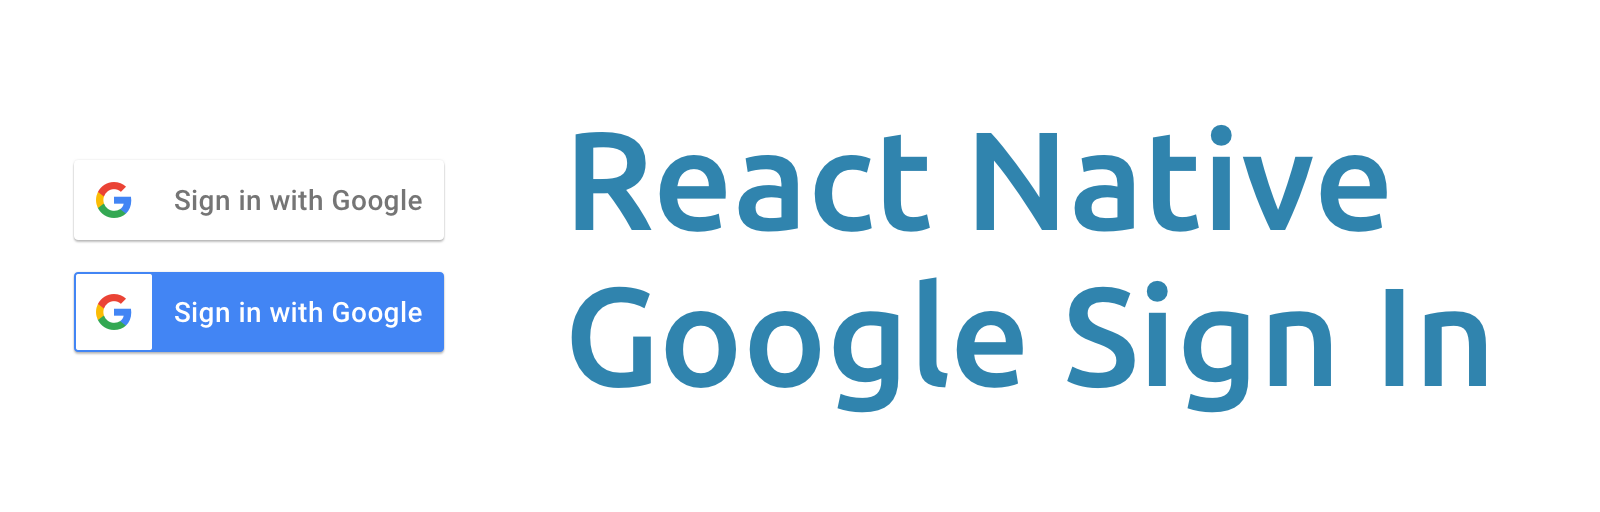 React Native Google Sign In